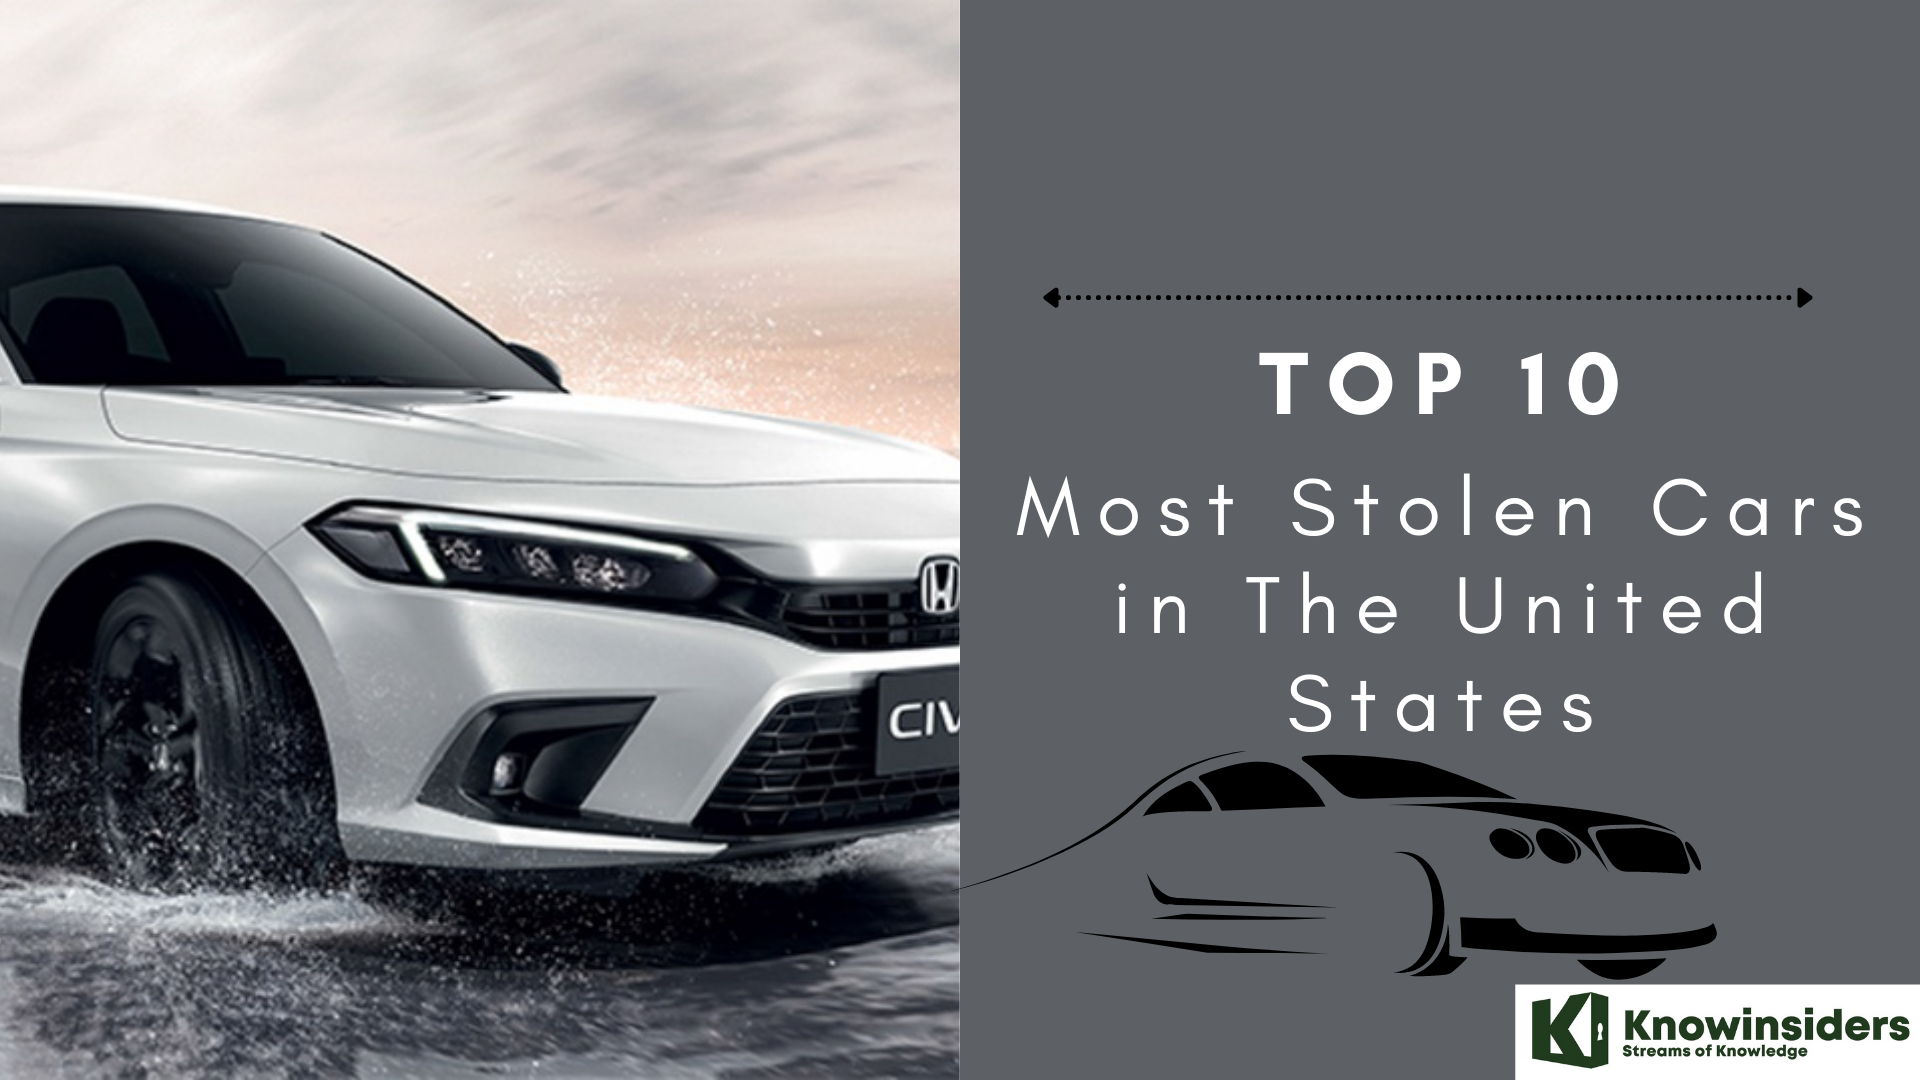 Top 10 most stolen cars in the United States 